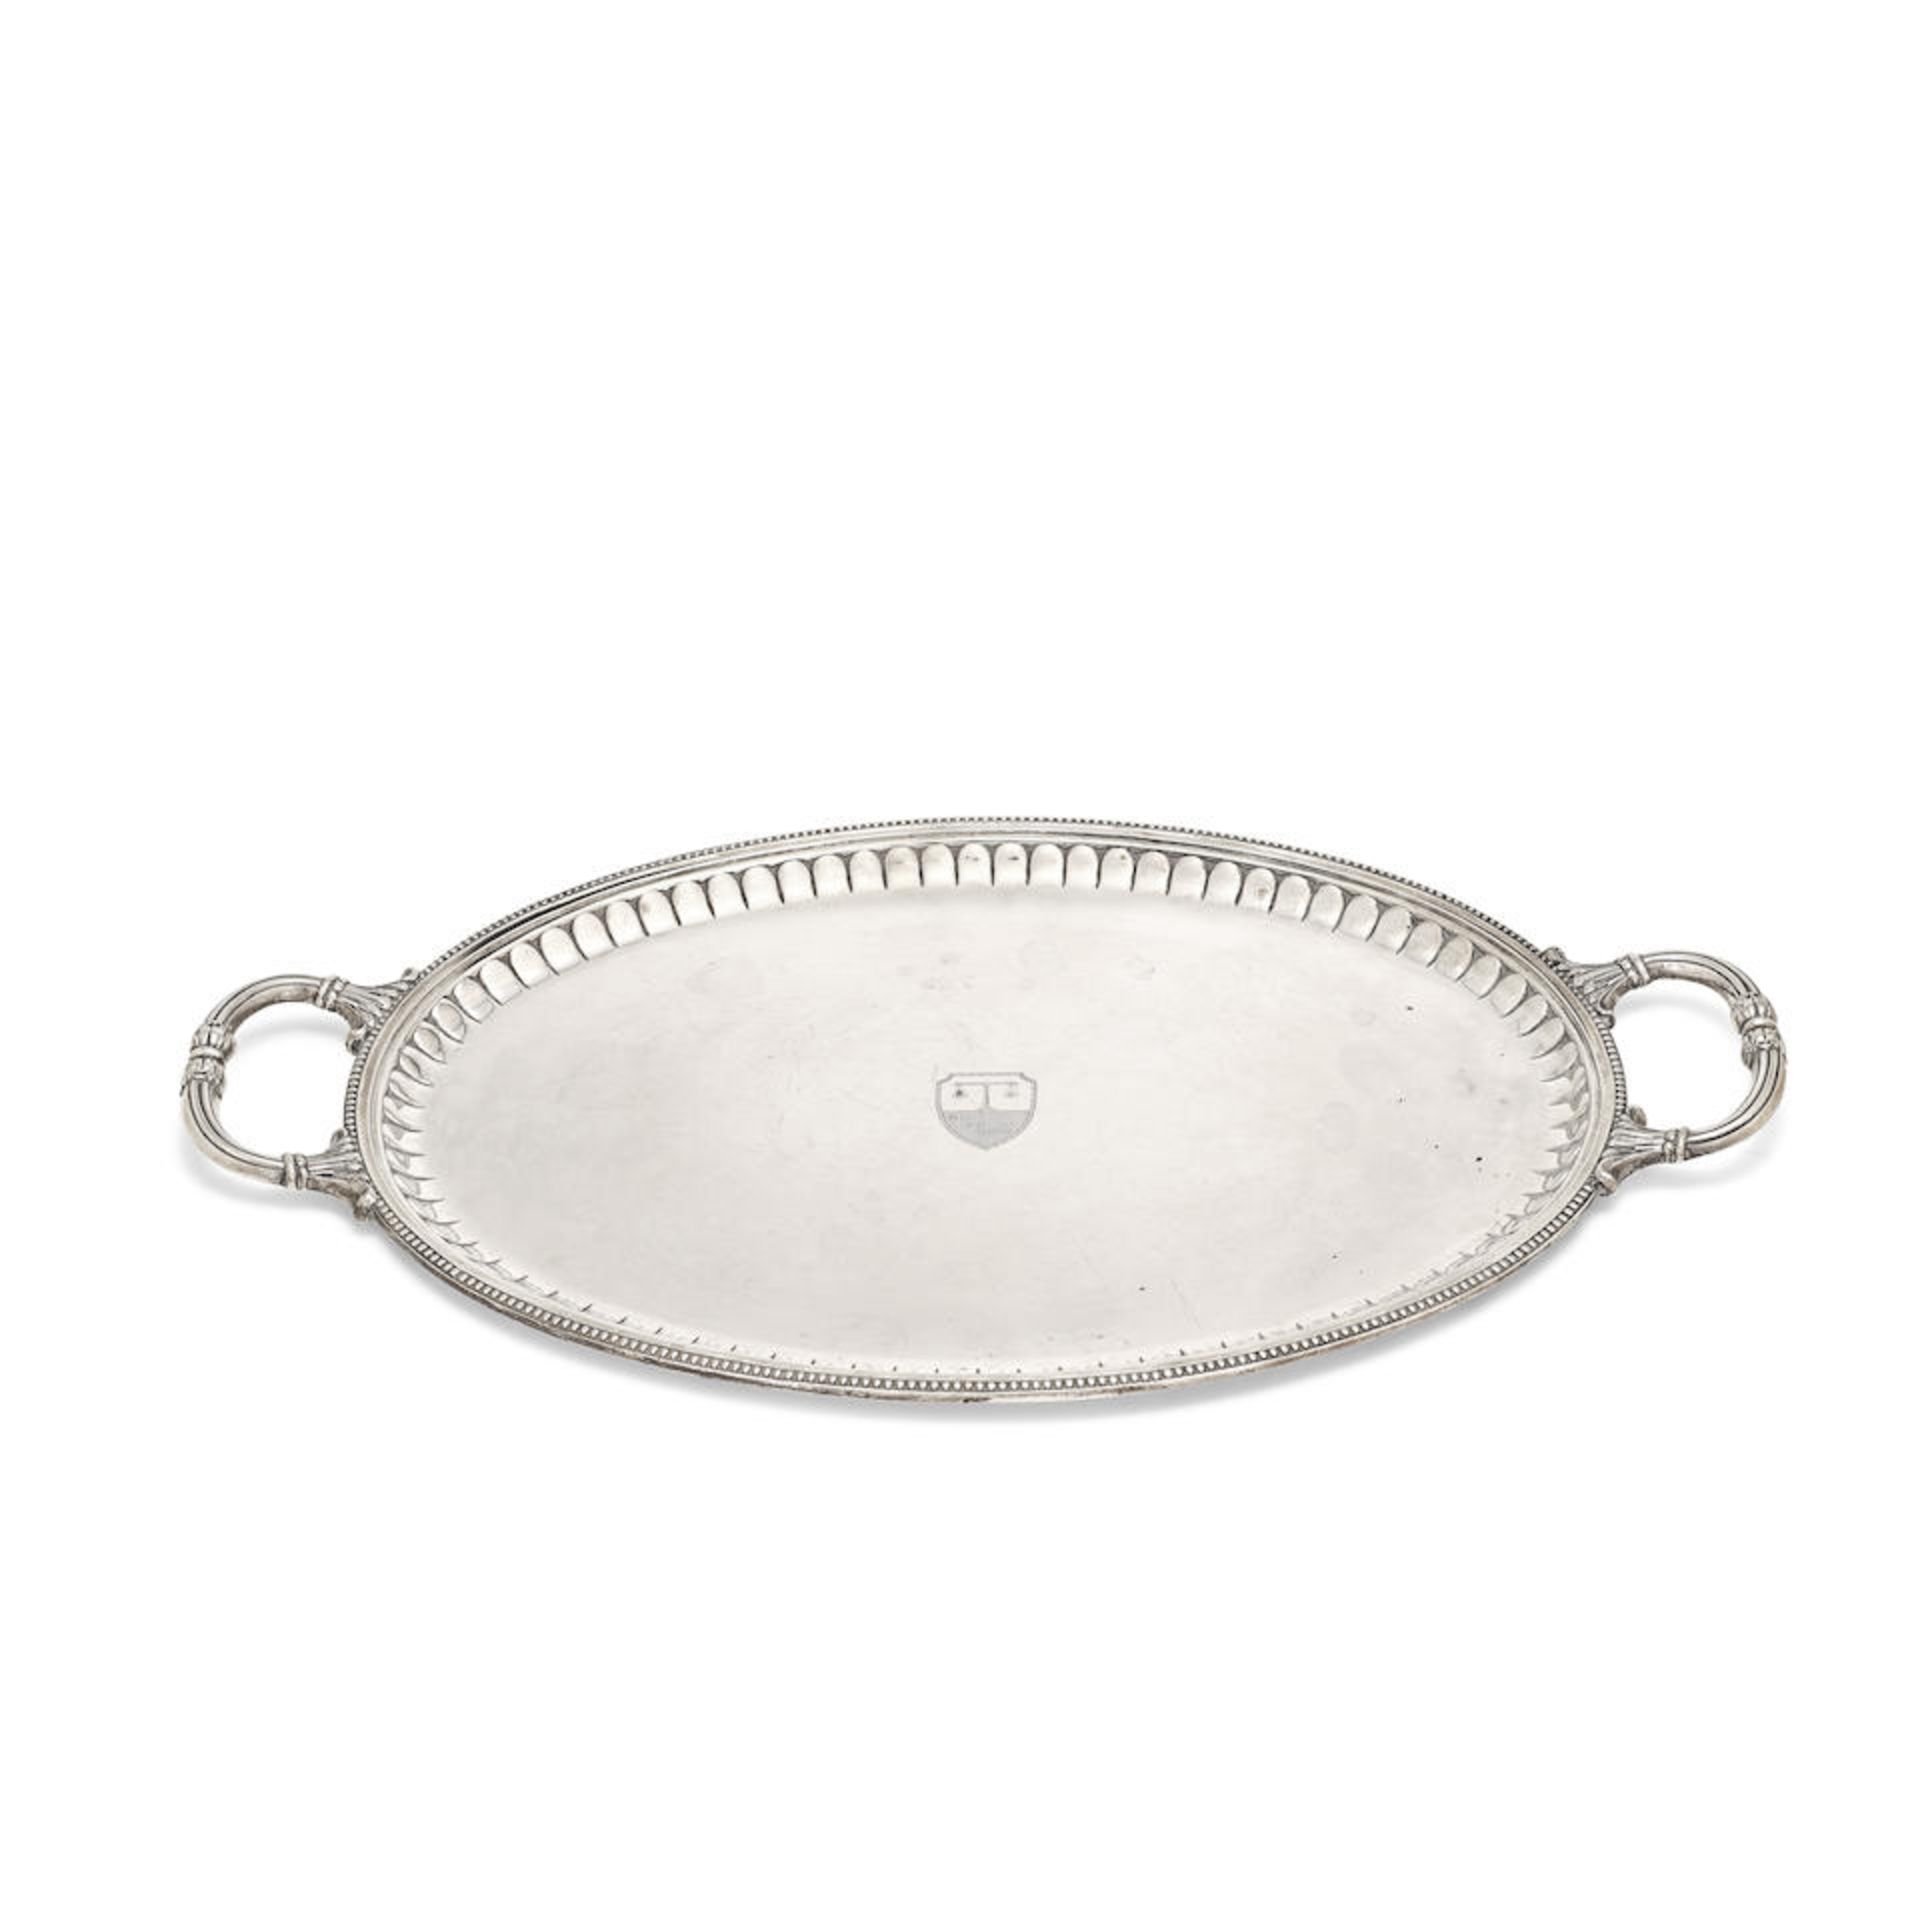 A Continental silver two-handled tray stamped with a maker's mark and 800